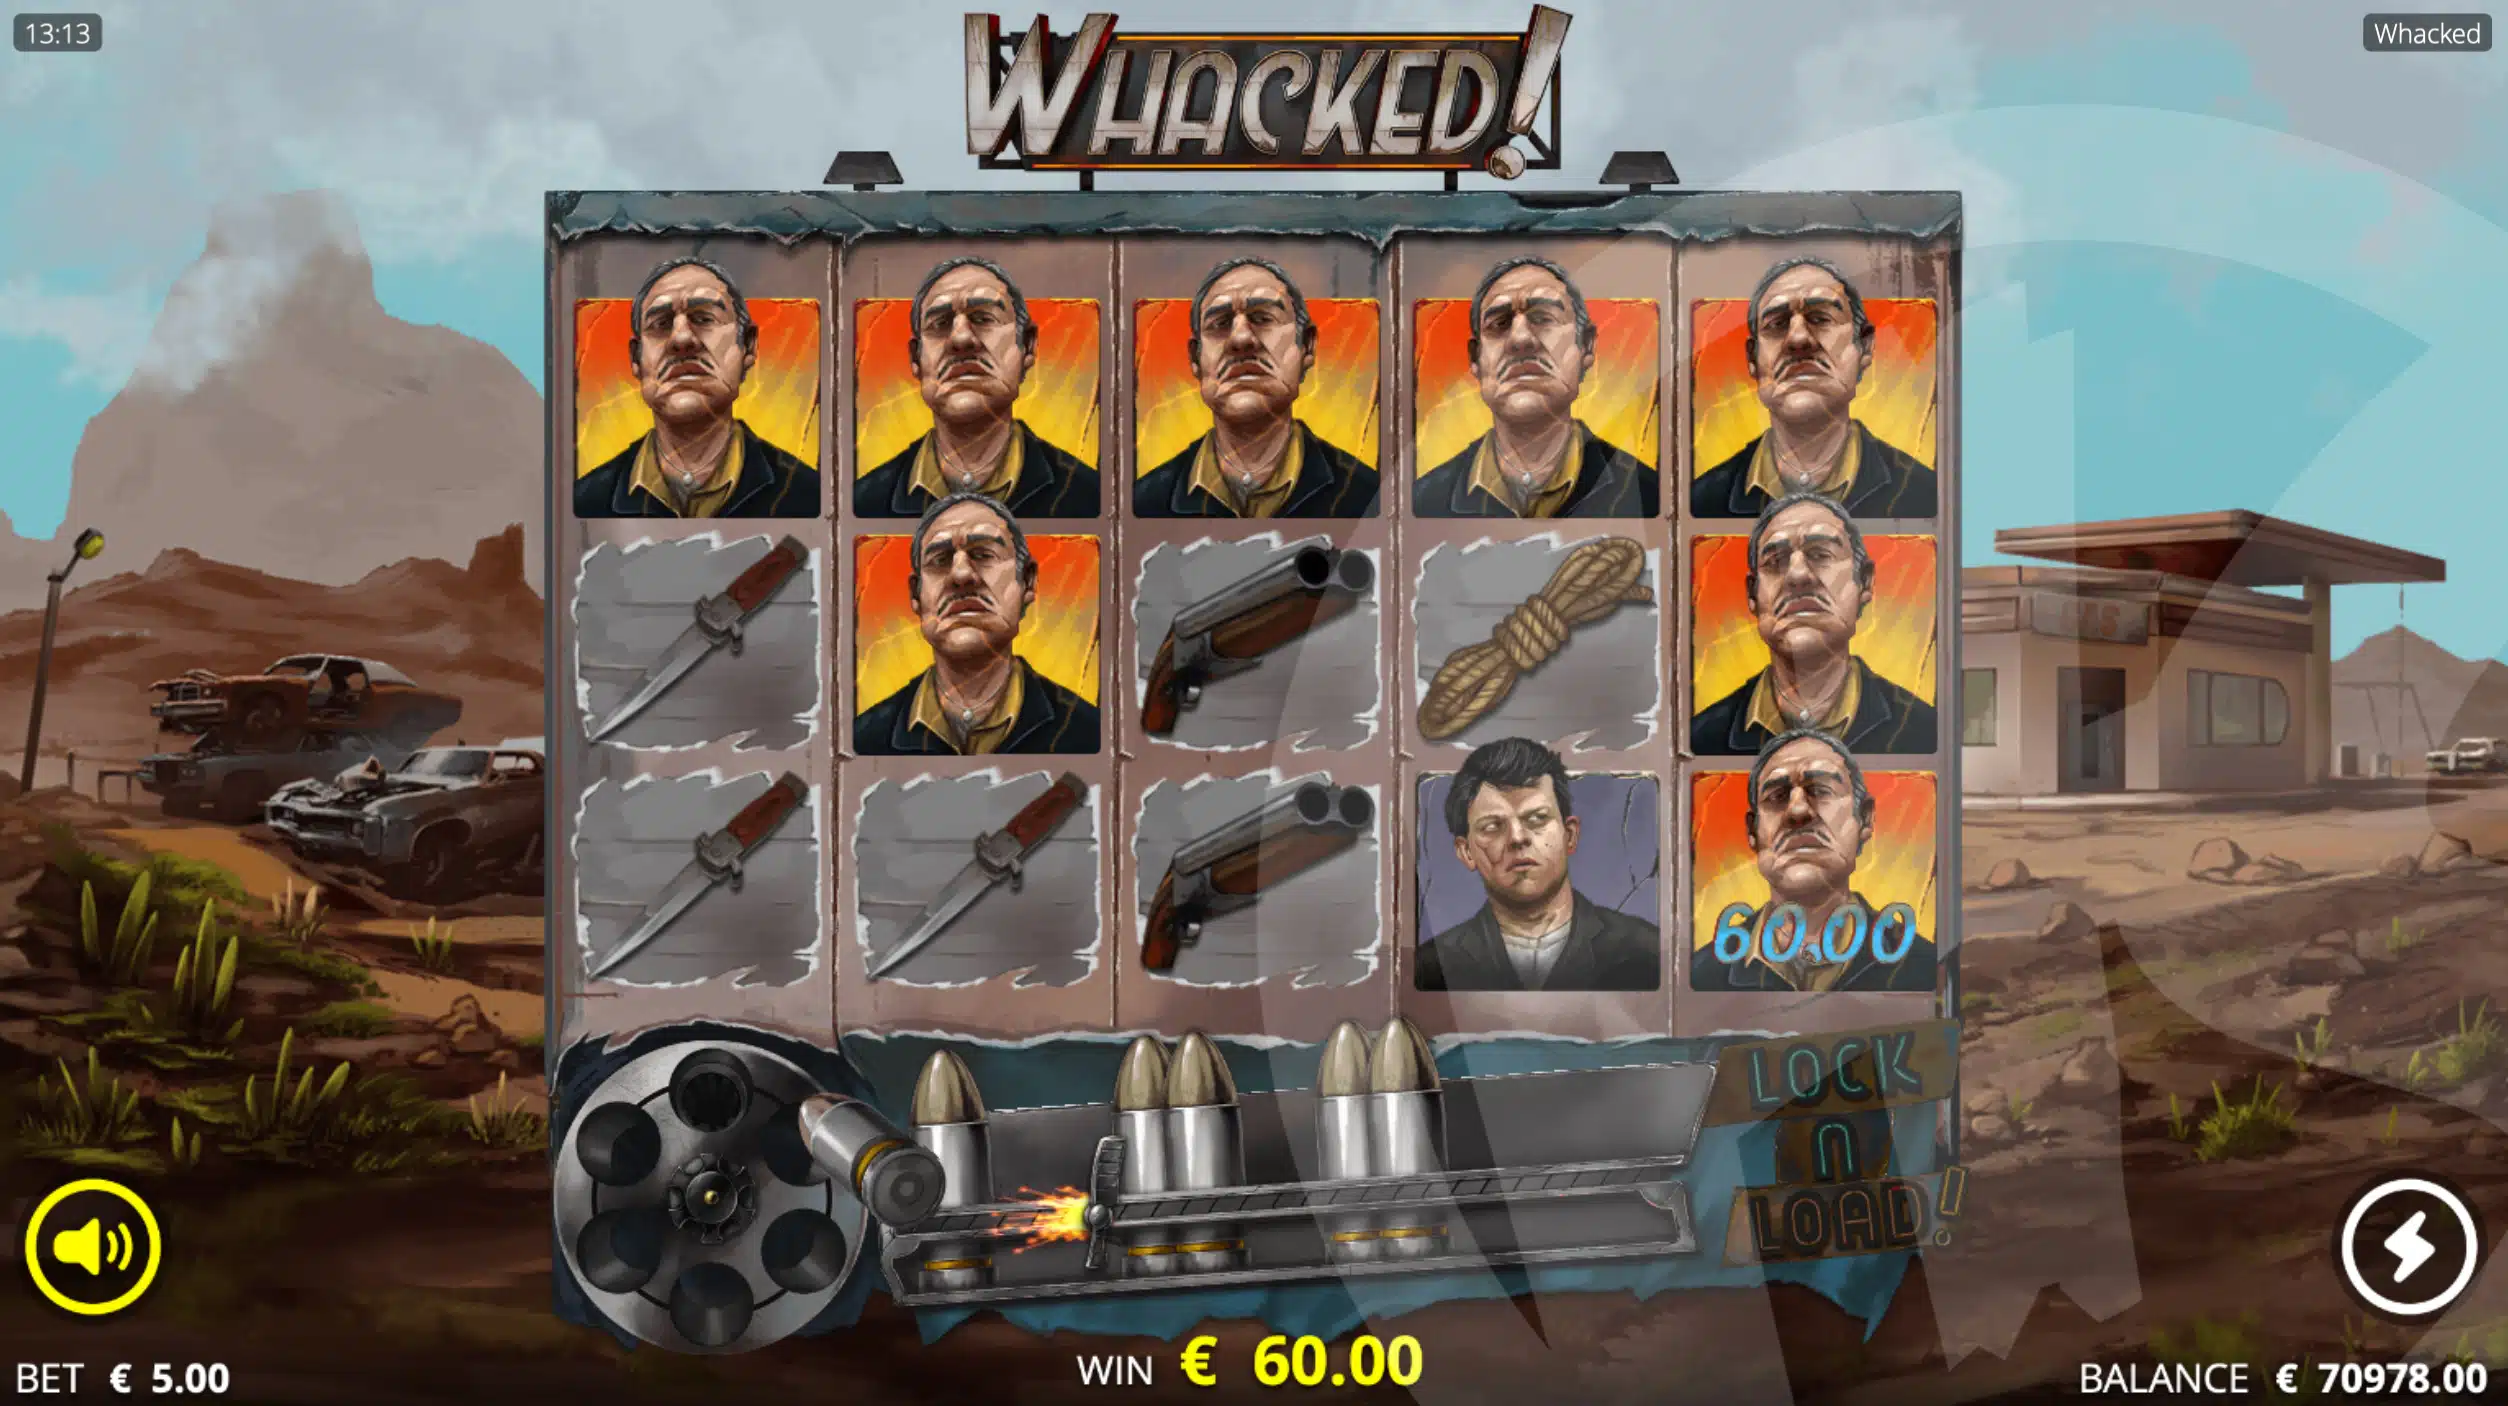 Whacked Offers Players a Minimum of 243 Ways to Win